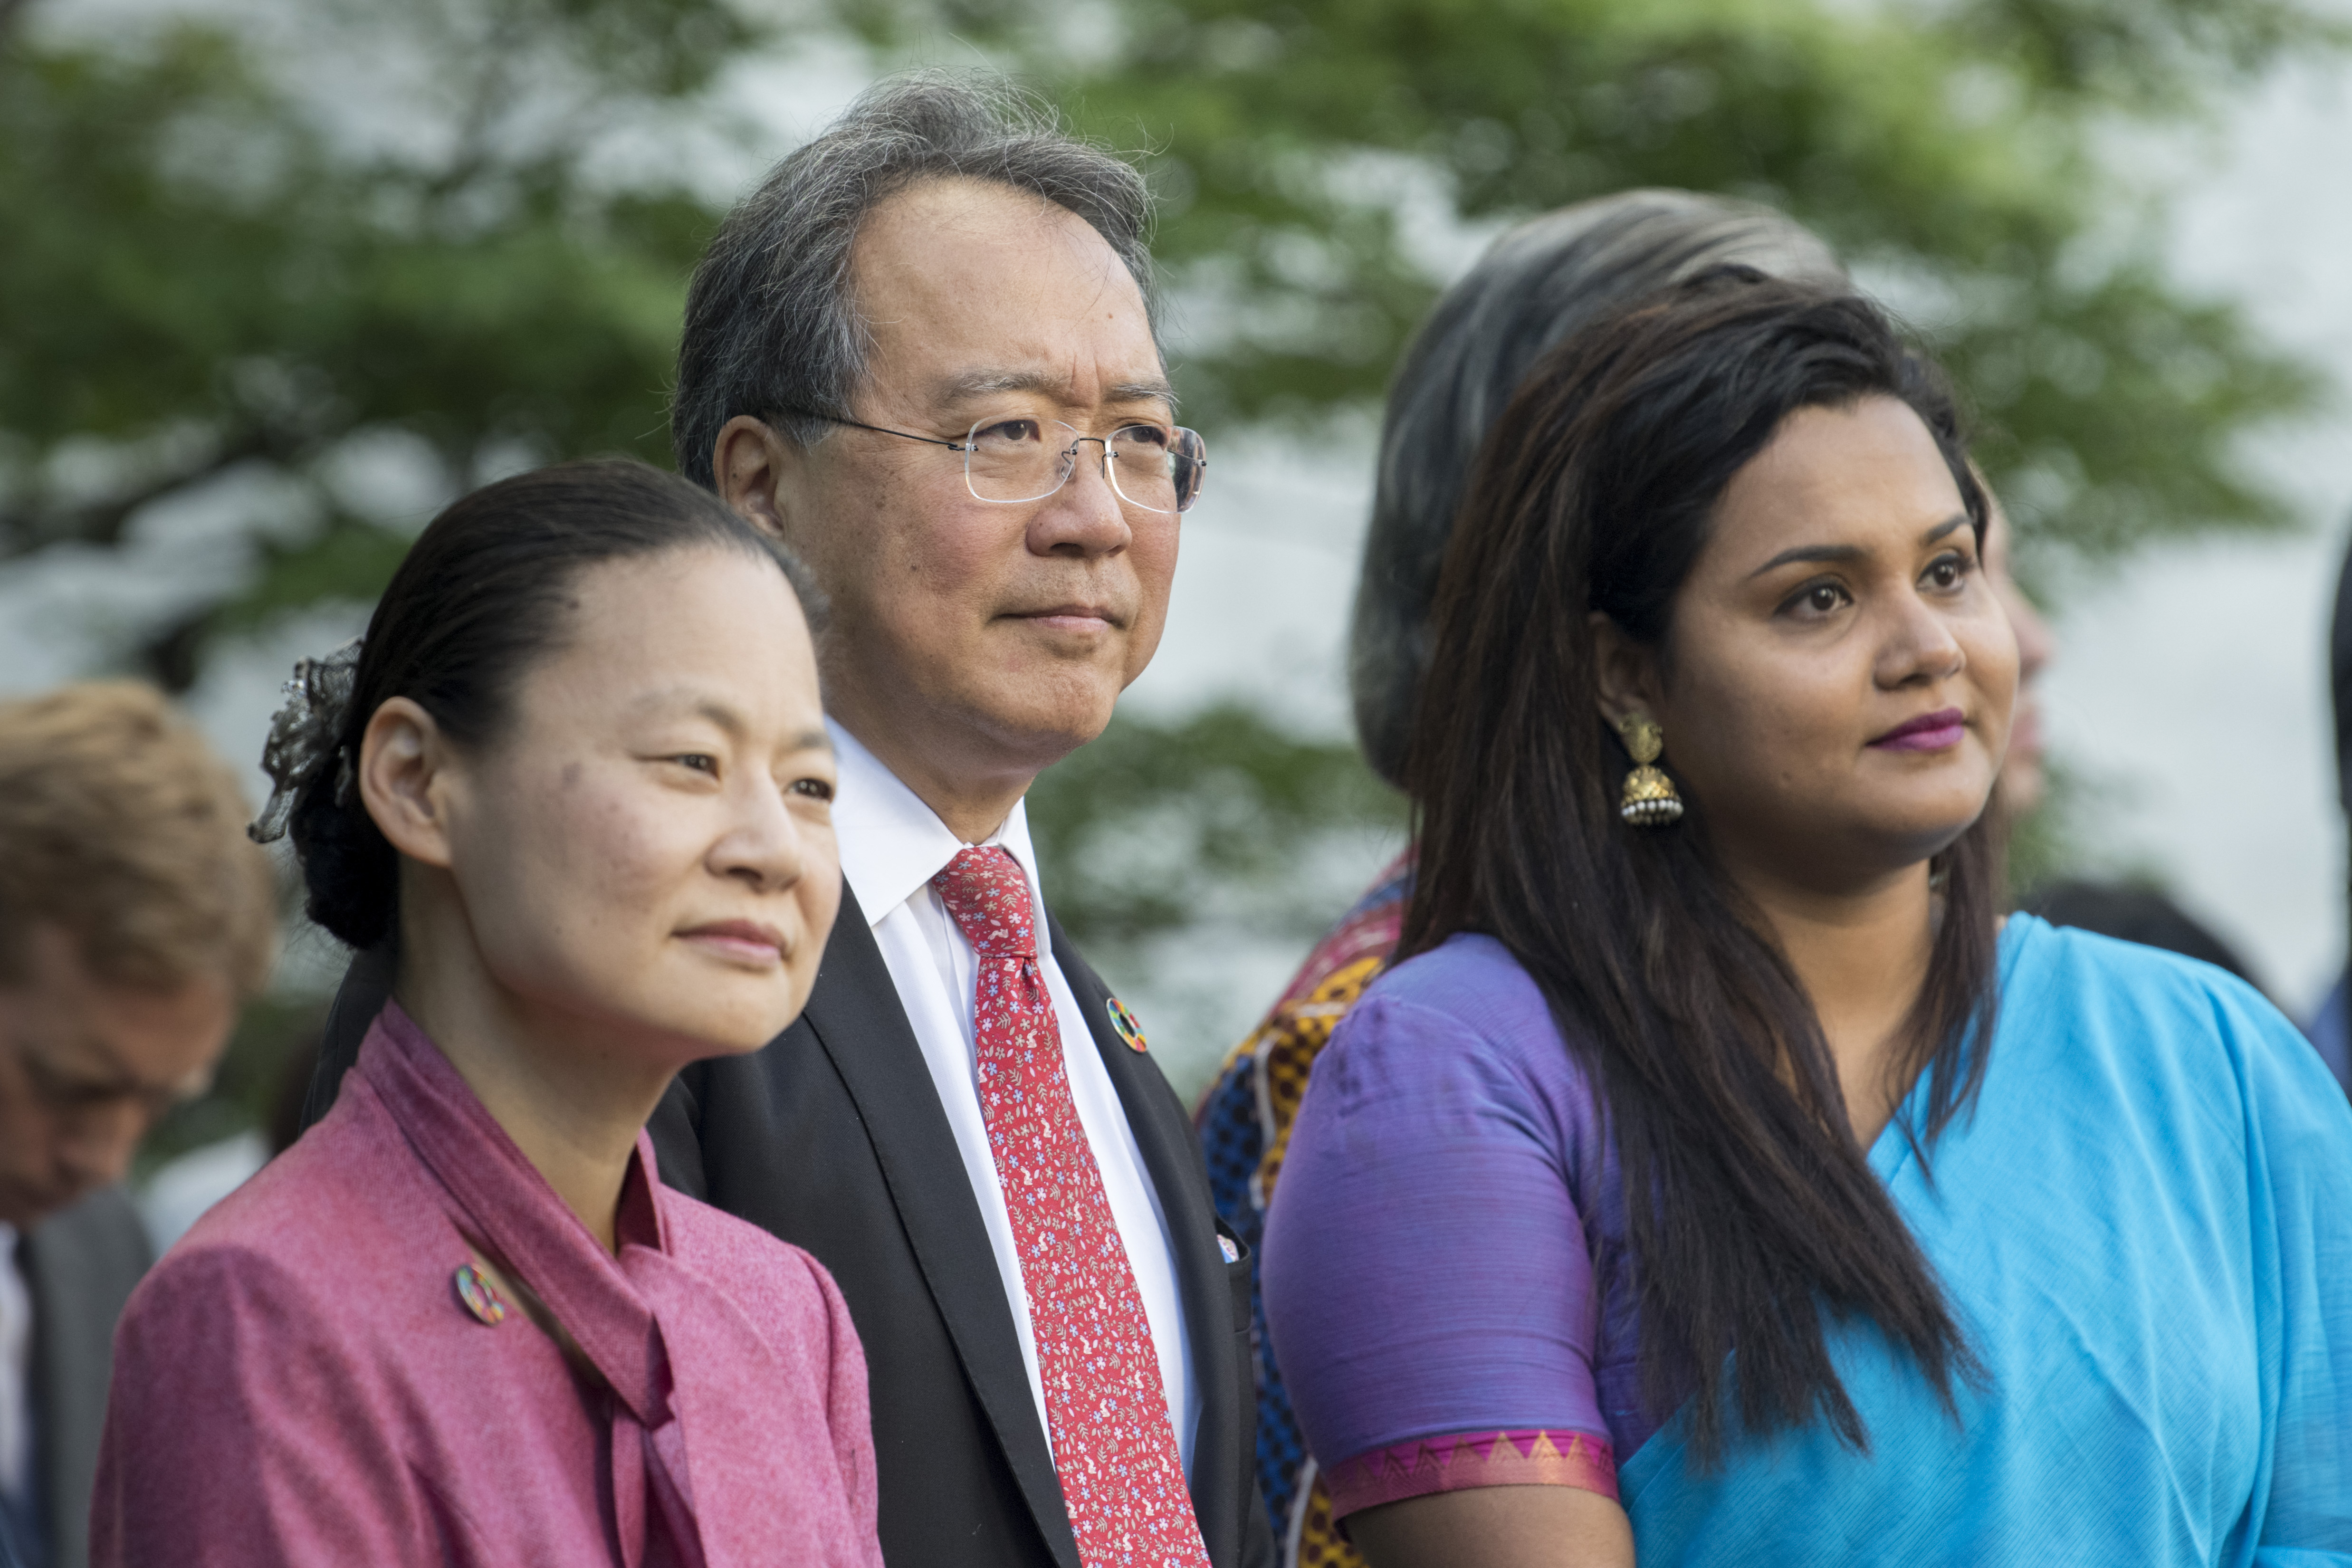 UN Messengers of Peace Yo-Yo Ma and Midori Goto, and Jayathma Wickramanayake, UN Secretary-General's Envoy on Youth, attend the ceremony in observance of the International Day of Peace (21 September) at UN headquarters. 20 Sep 2019/ UN Photo/Mark Garten